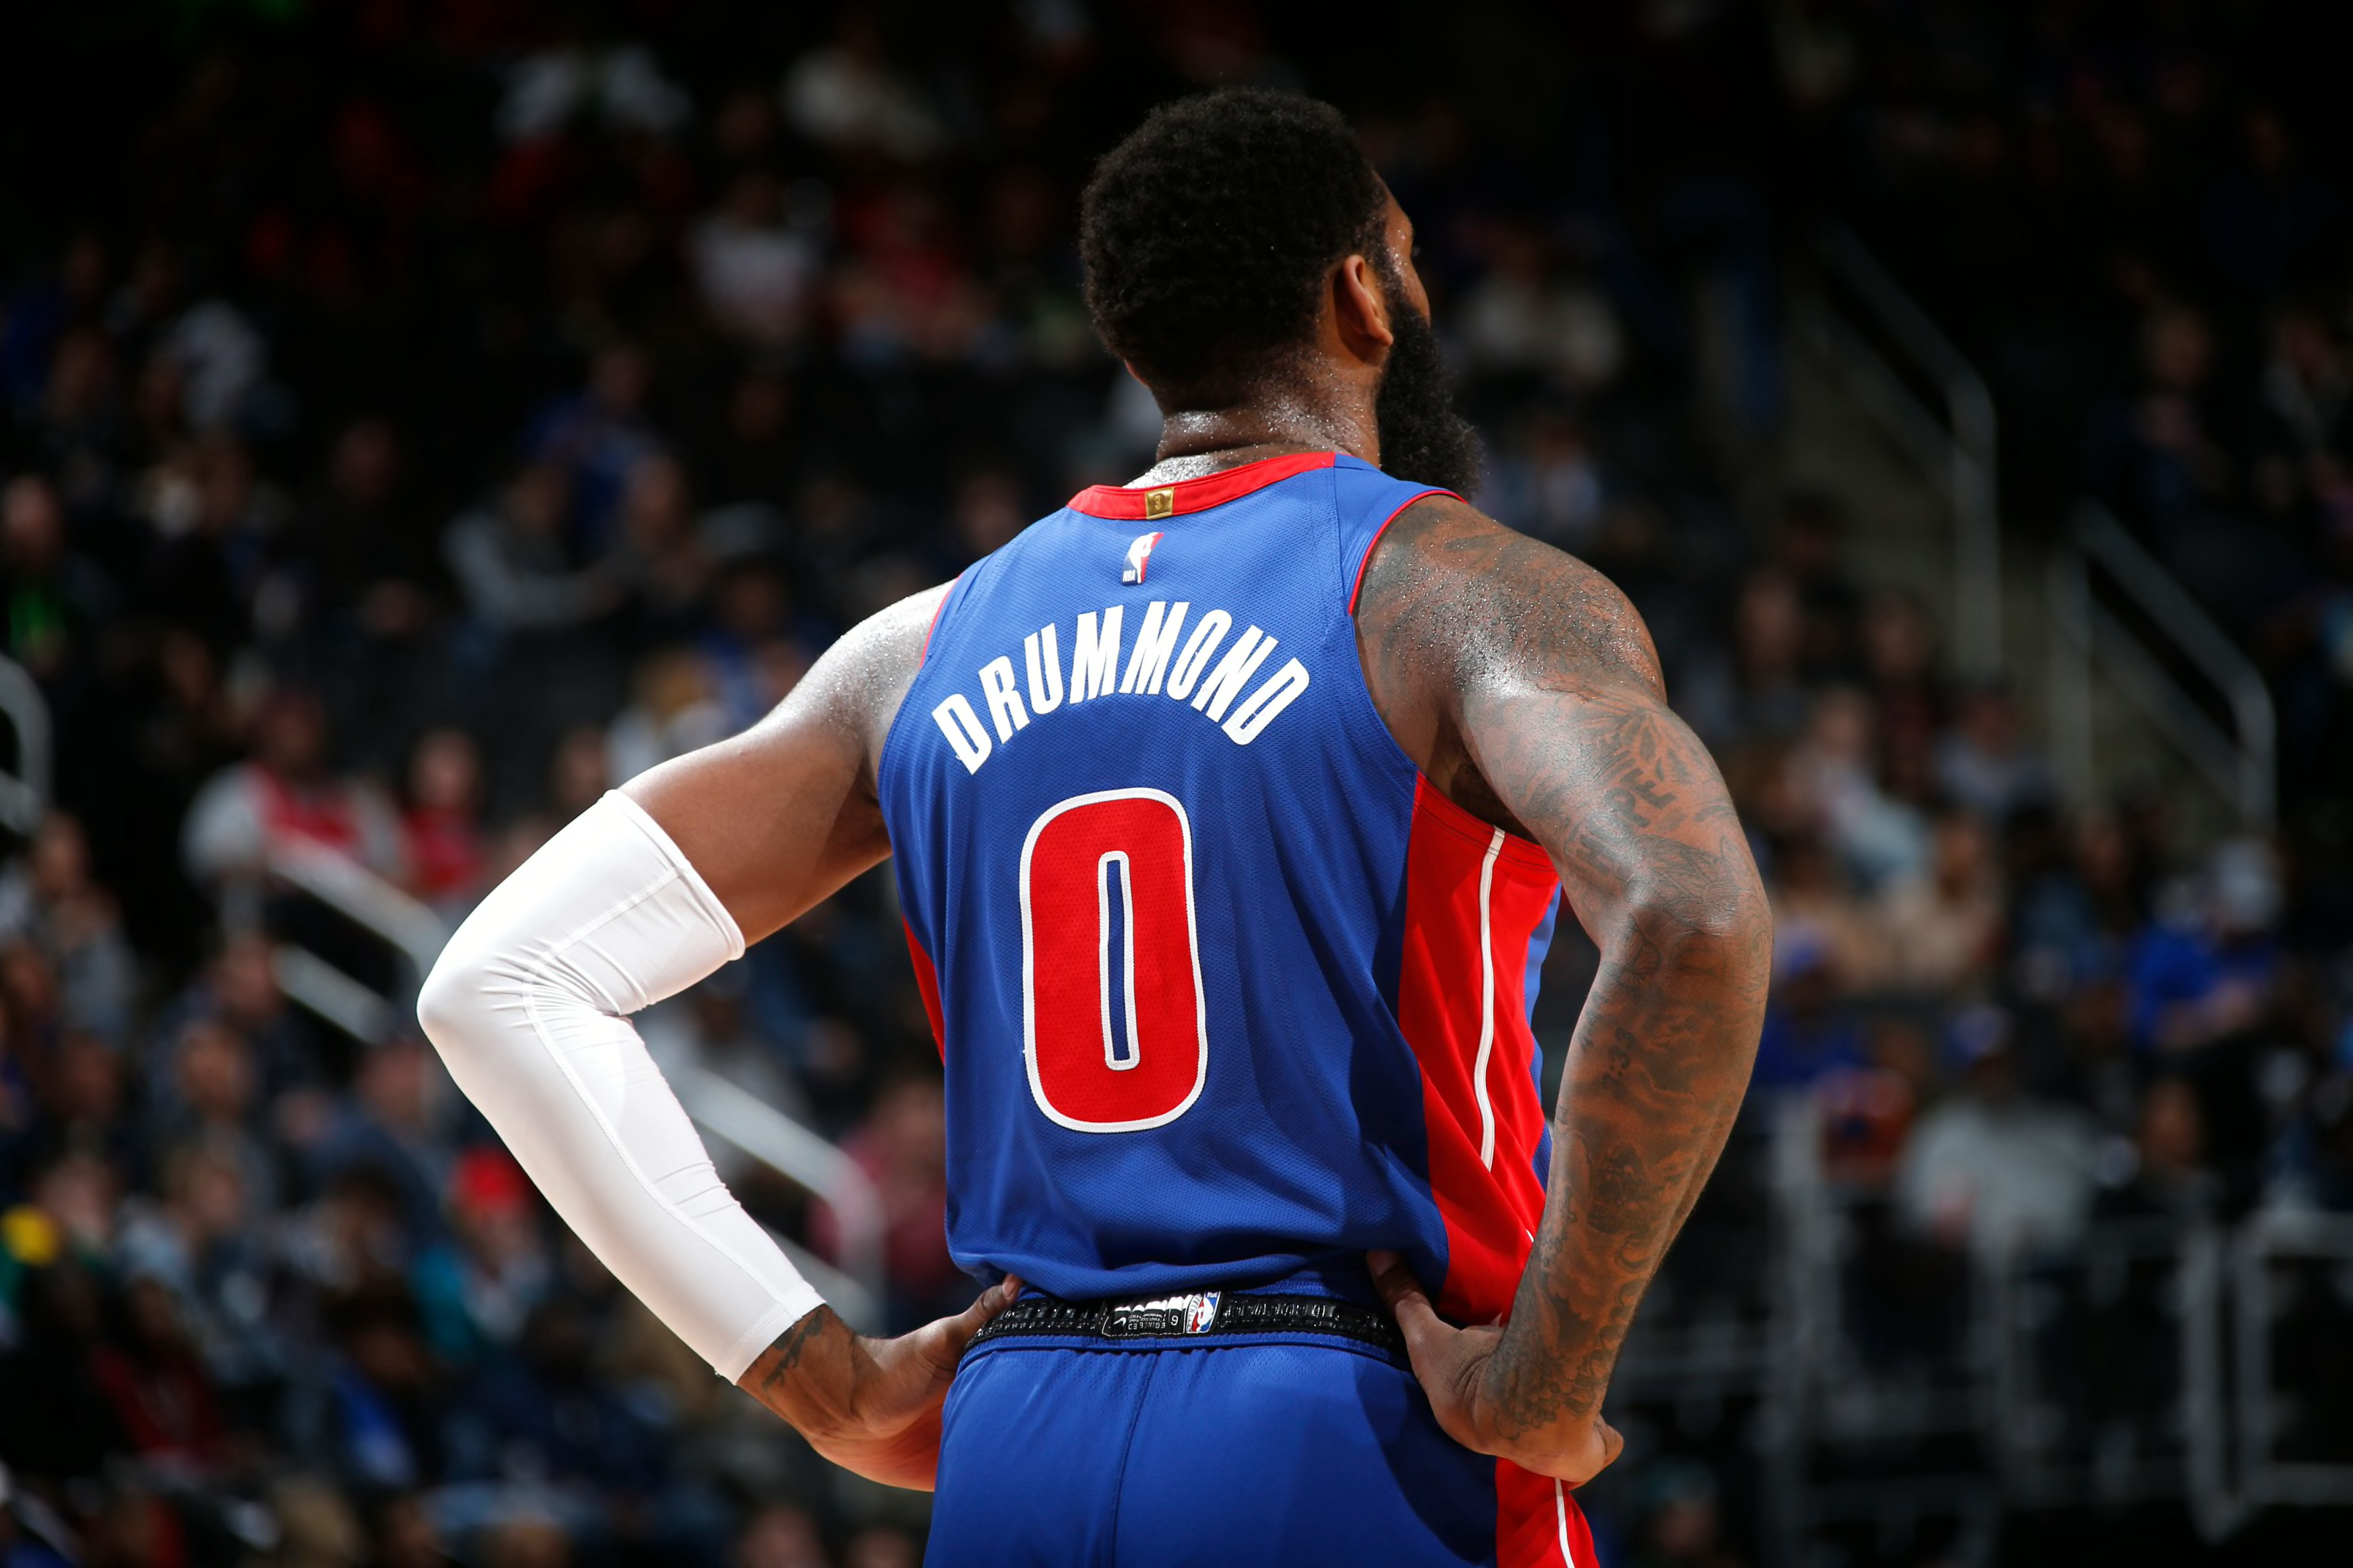 Andre Drummond - Chicago Bulls - Game-Worn City Edition Jersey - Dressed,  Did Not Play (DNP) - 1 of 2 - 2022-23 NBA Season